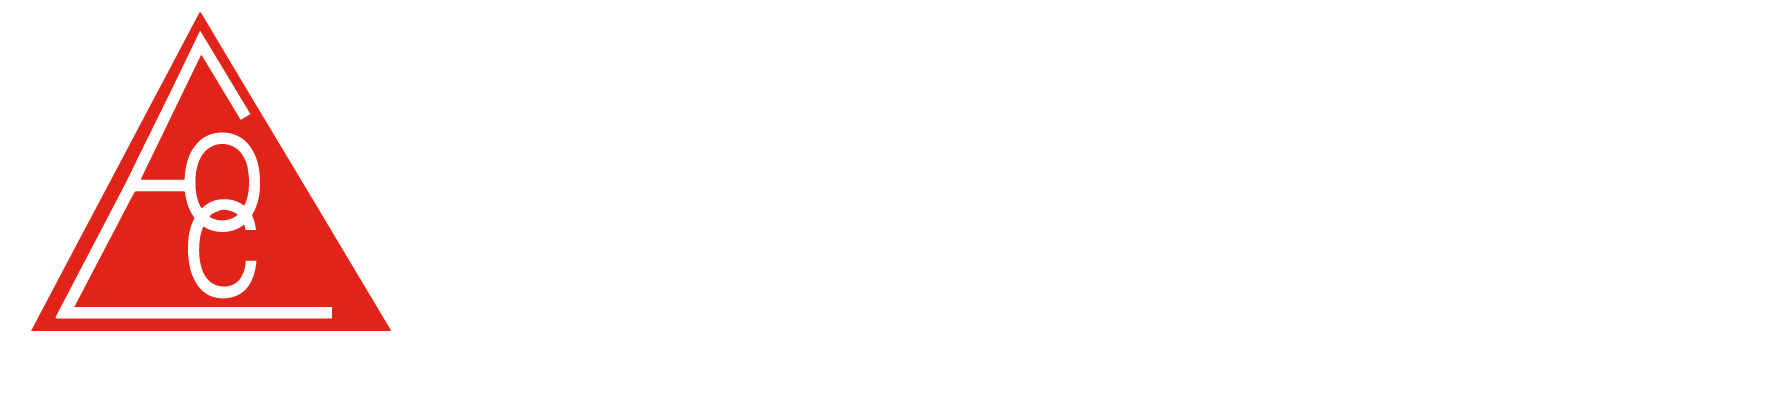 O’Connell Electric Company, Inc.